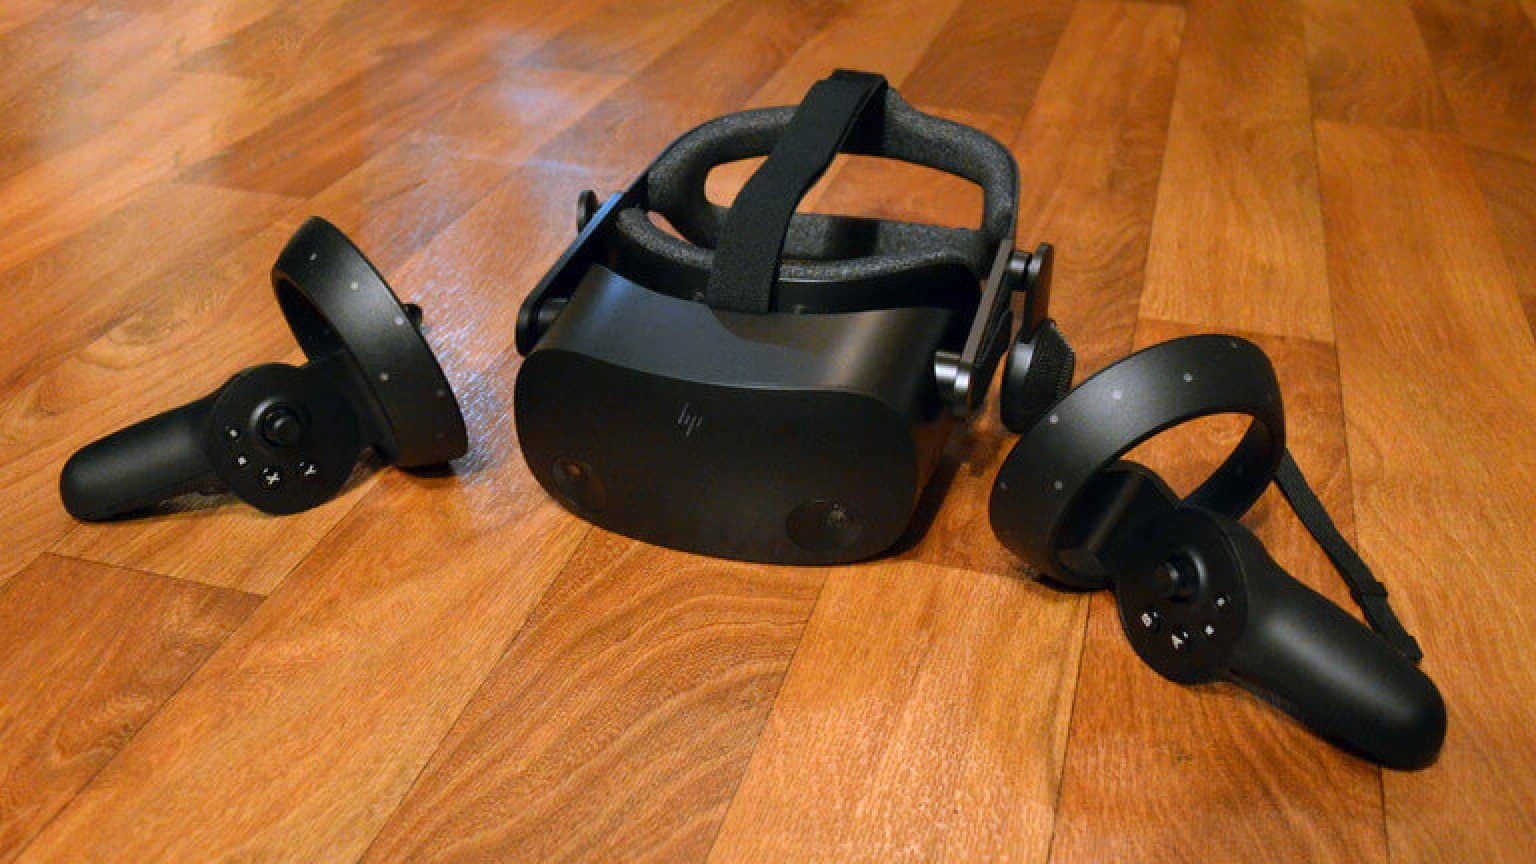 Best Vr Headsets For Porn Virtual Reality Sex Toys Review